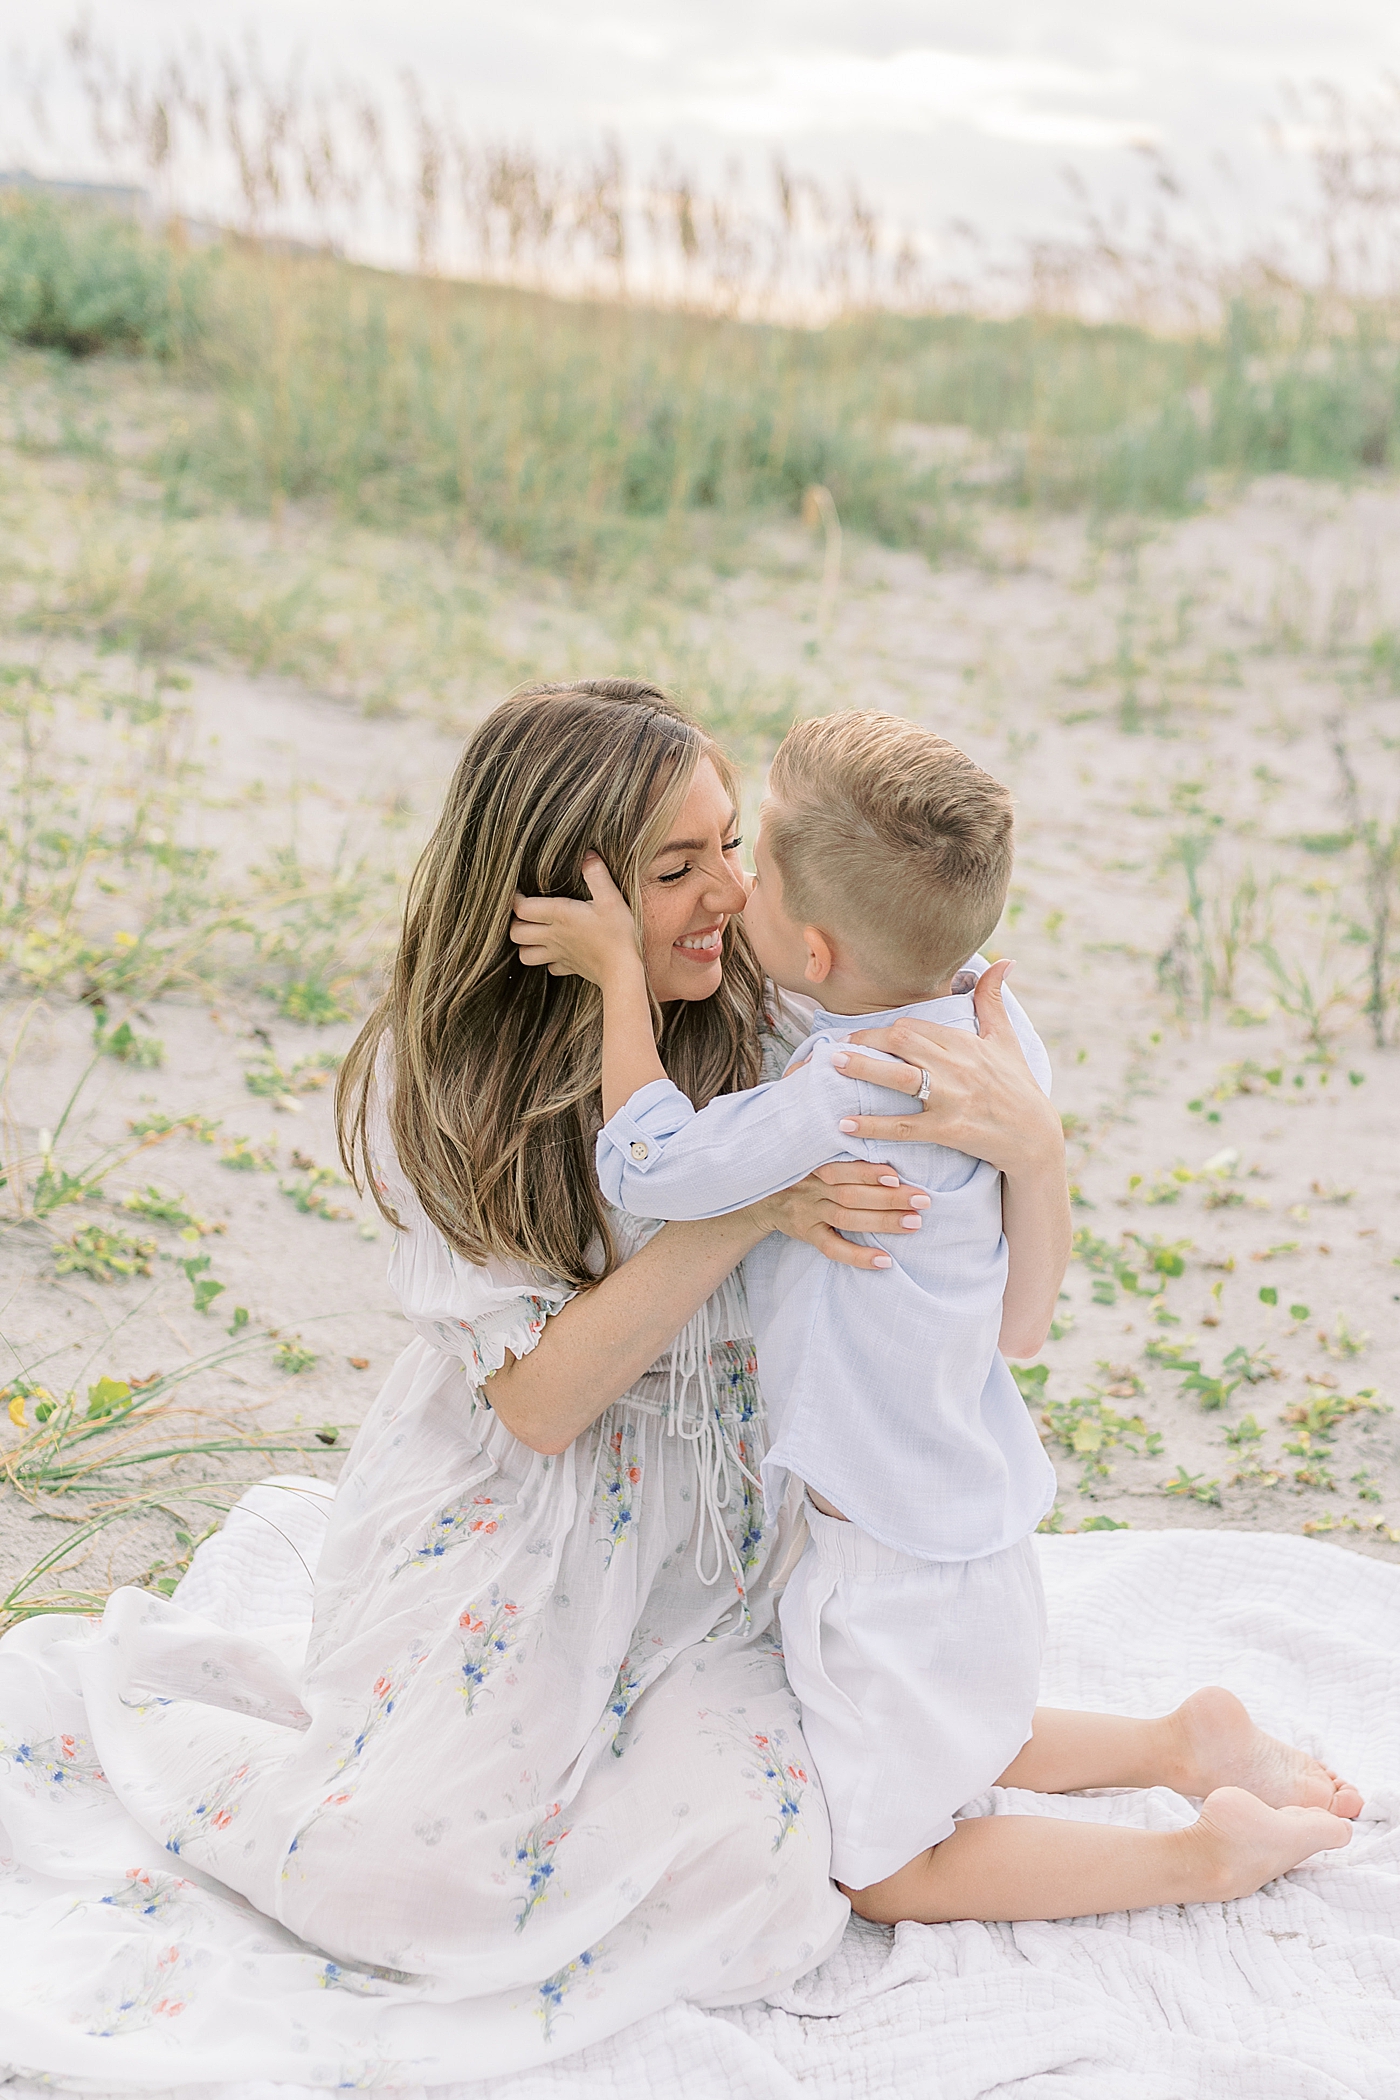 Mom snuggling with her little boy on the beach | Image by Caitlyn Motycka